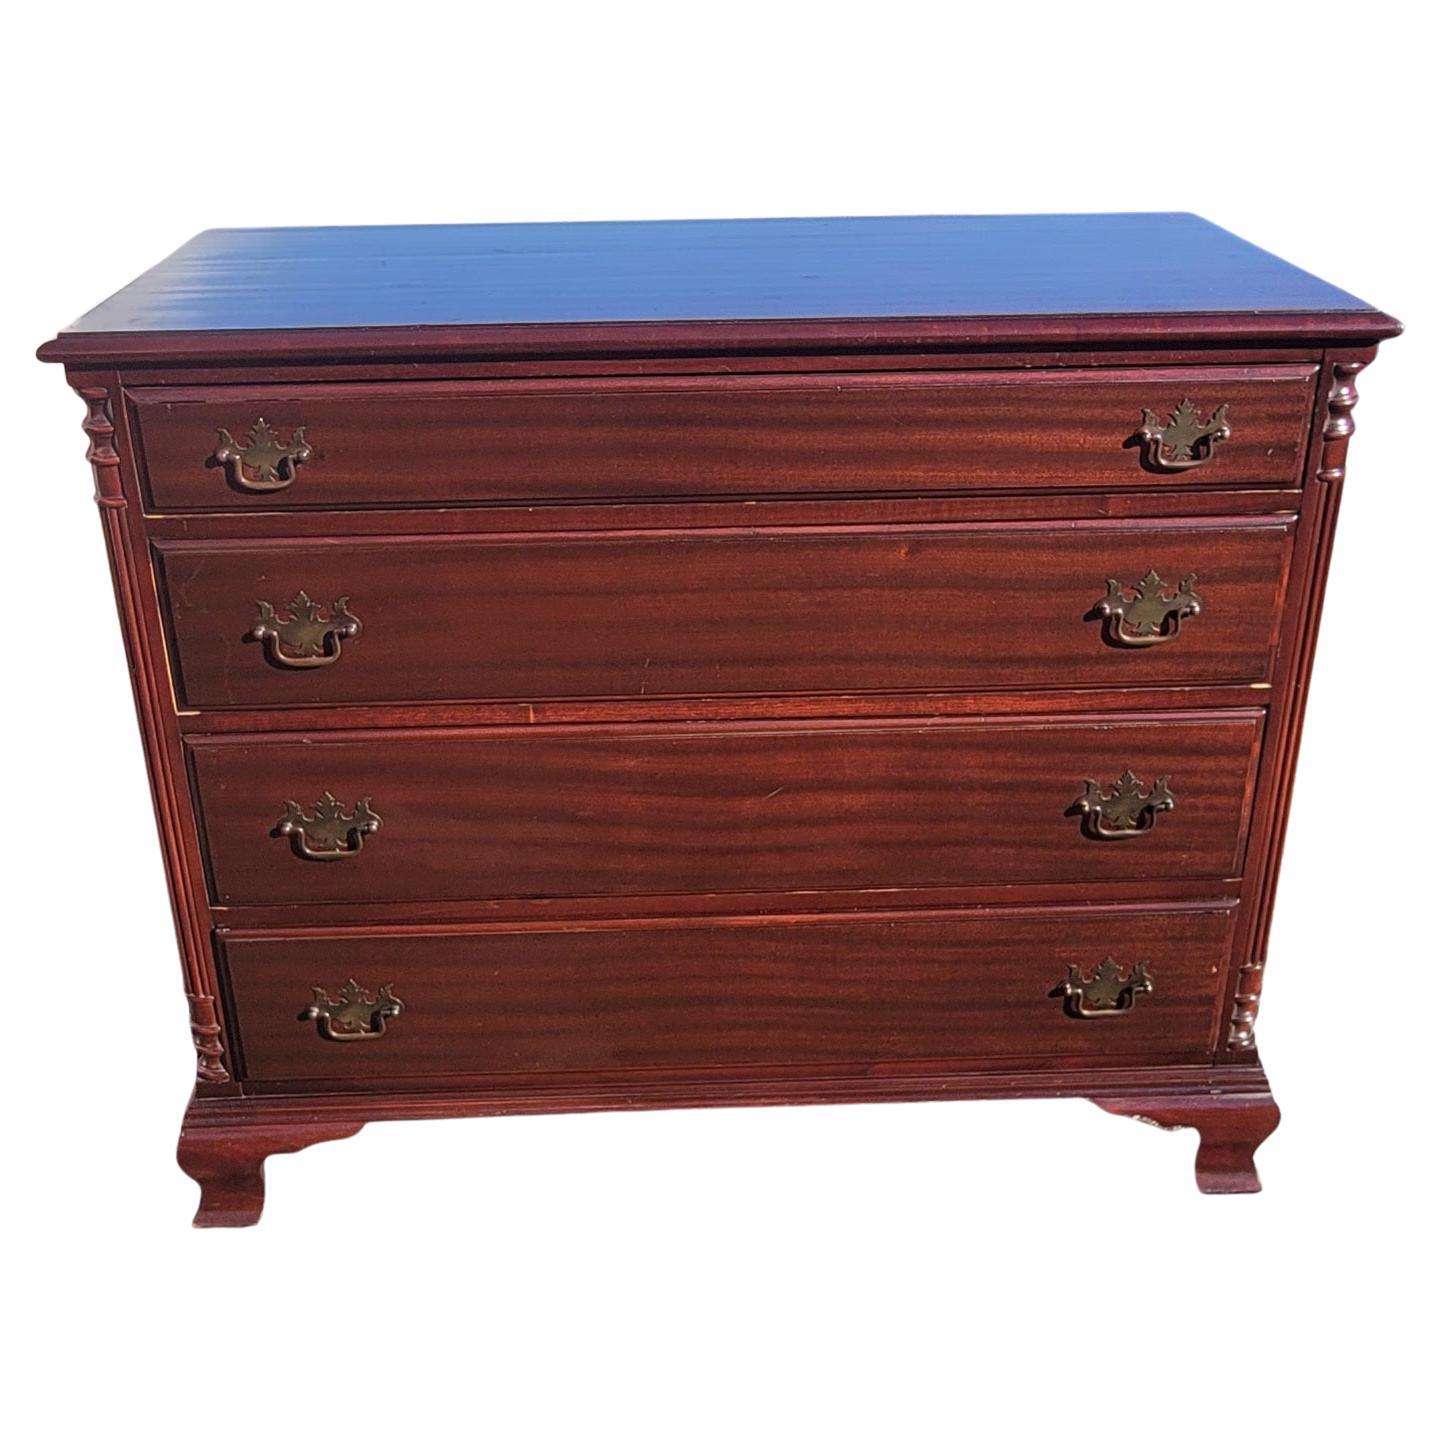 A beautiful and patinated Early 1900's Chippendale genuine Mahogany commode chest of drawers in good condition. Beautiful mahogany grain. Dovetail drawers construction with patinated original drawer pulls. Perfectly functioning drawers. Measure